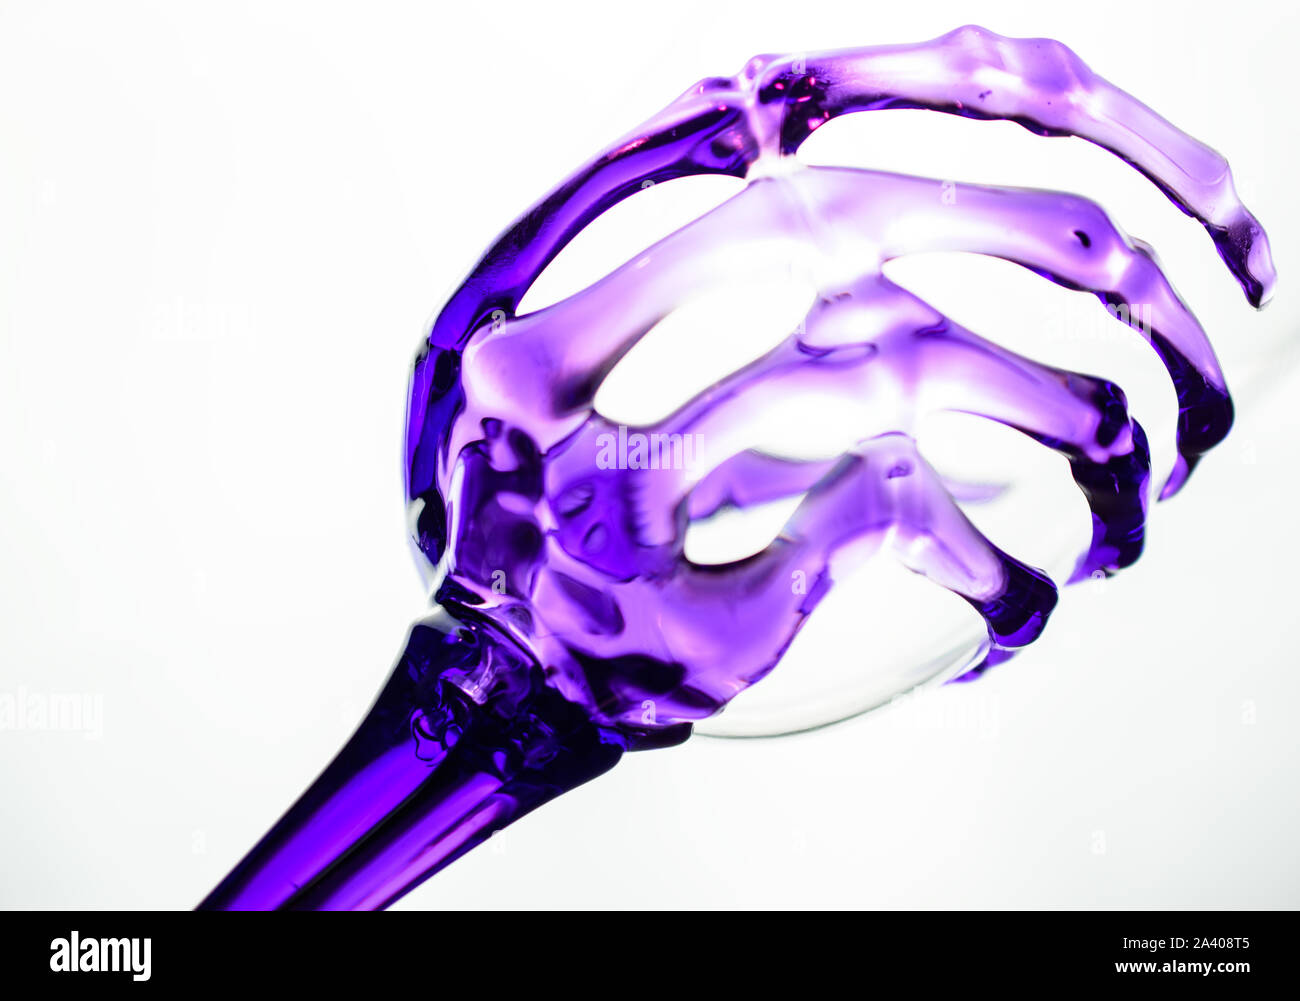 Cool Novelty Wine Glass with Transparent Purple  Skeleton Wrist and Hand making up the Stem and Gripping Bowl Stock Photo